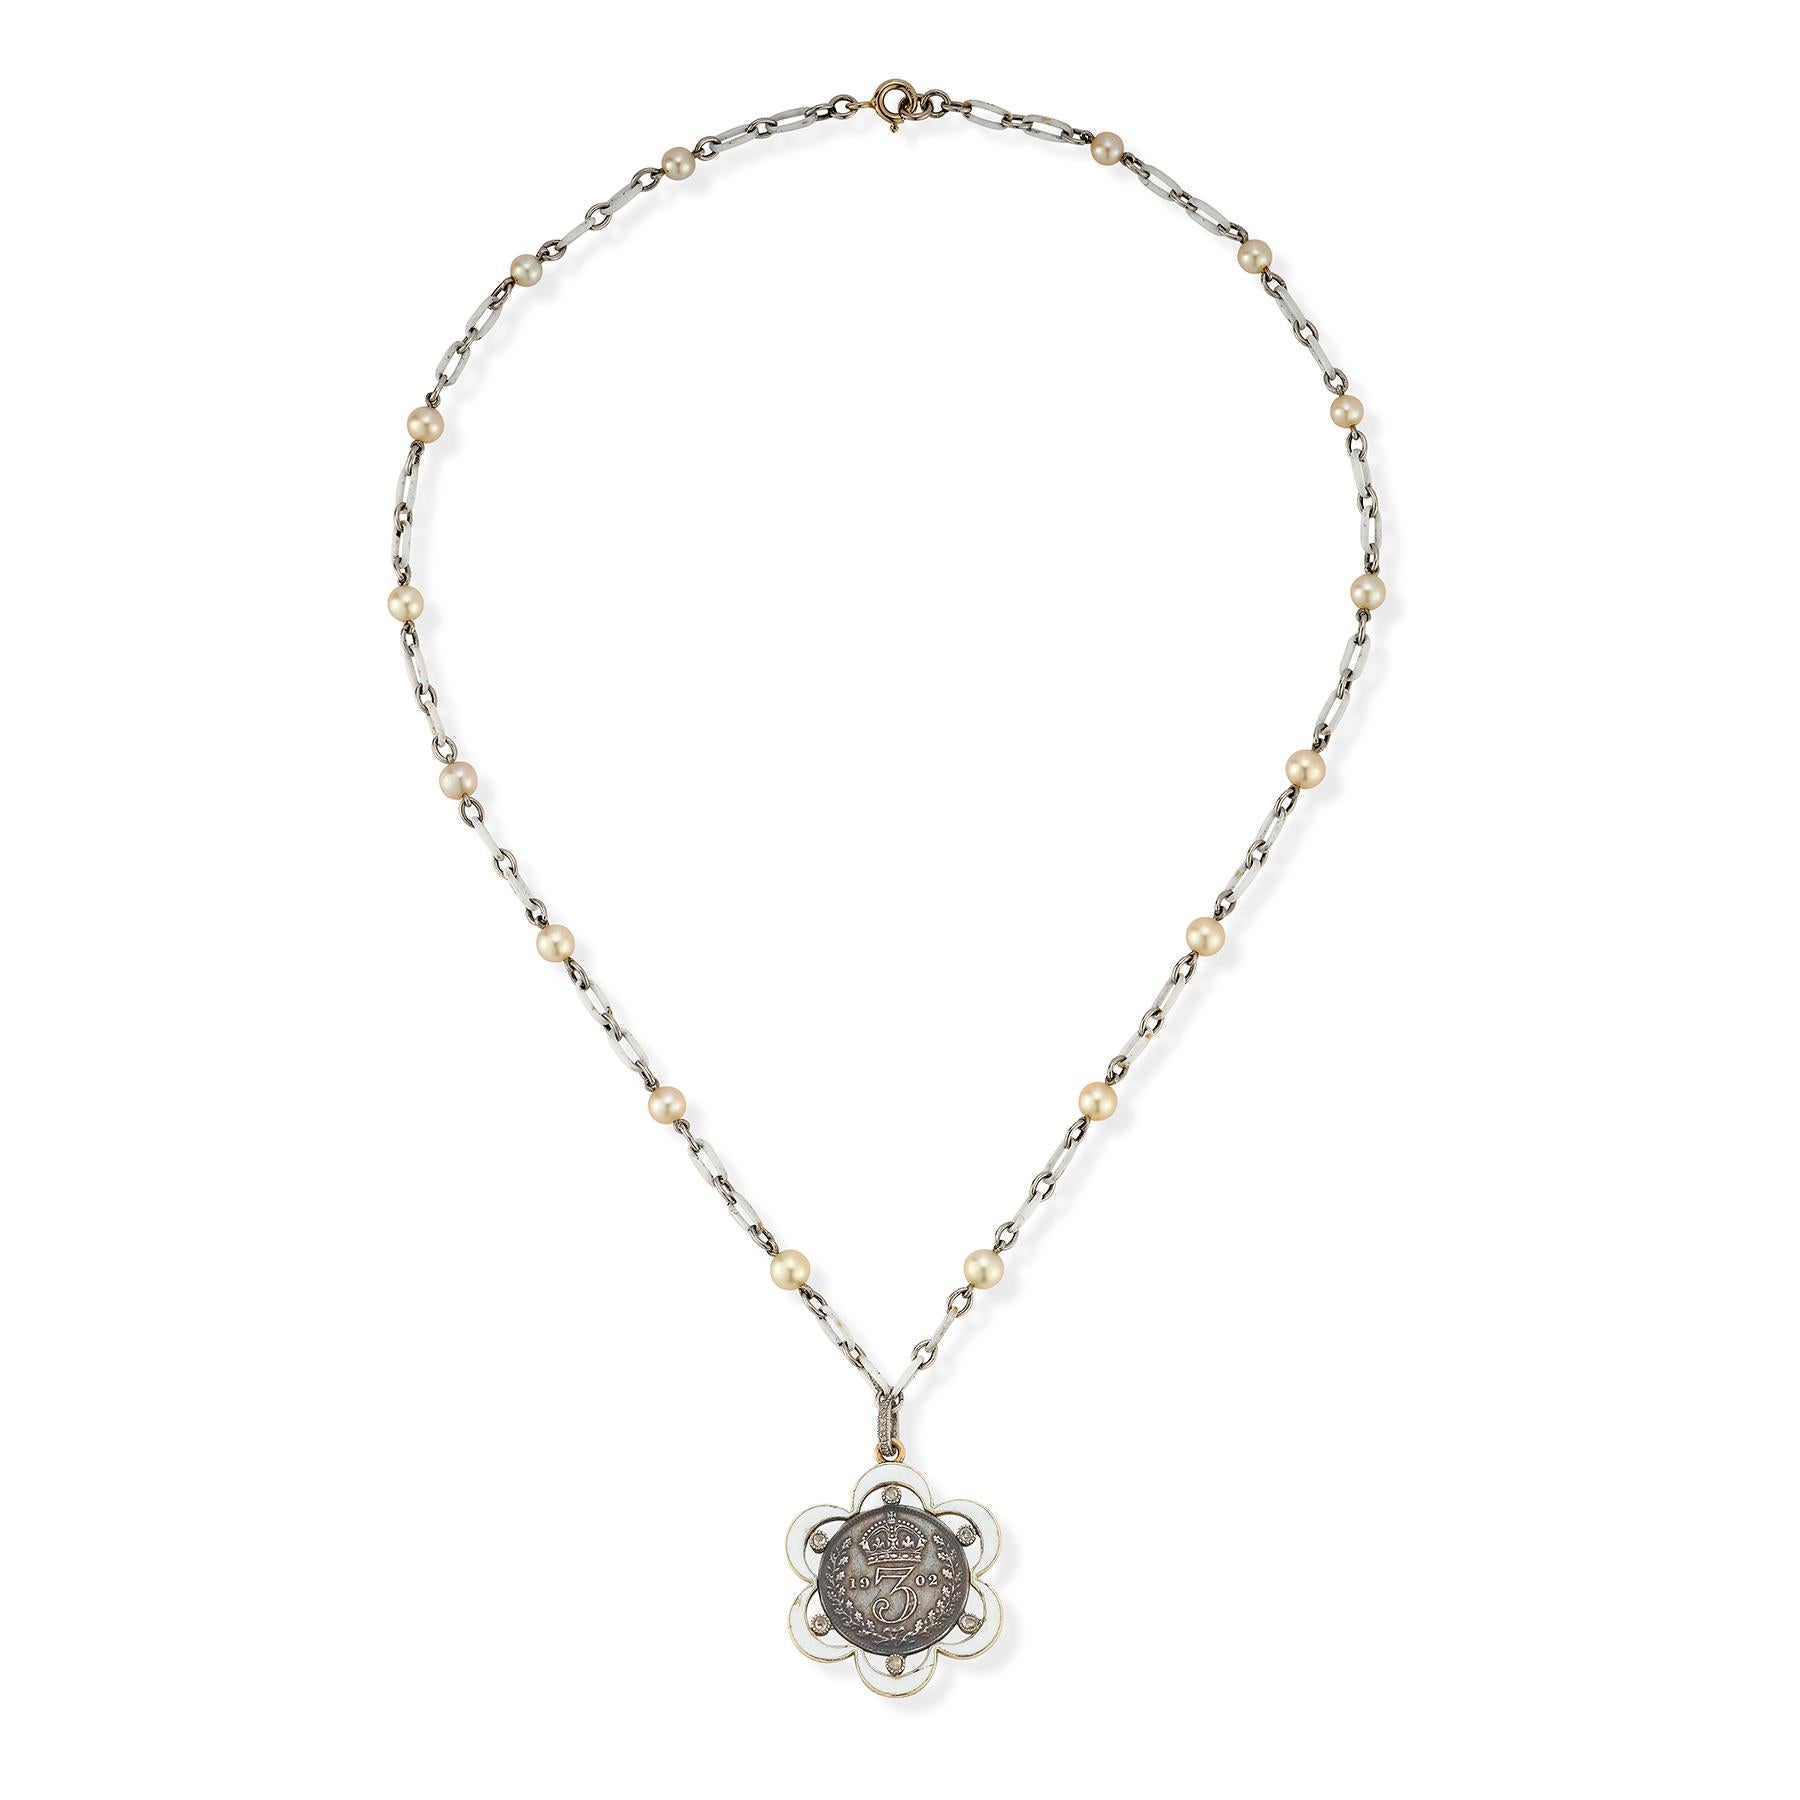 Cartier Pearl & Diamond Ancient Coin Necklace,  white enamel & pearl chain attaching an ancient coin with diamonds & enamel surrounding .

Measurements: 15.5